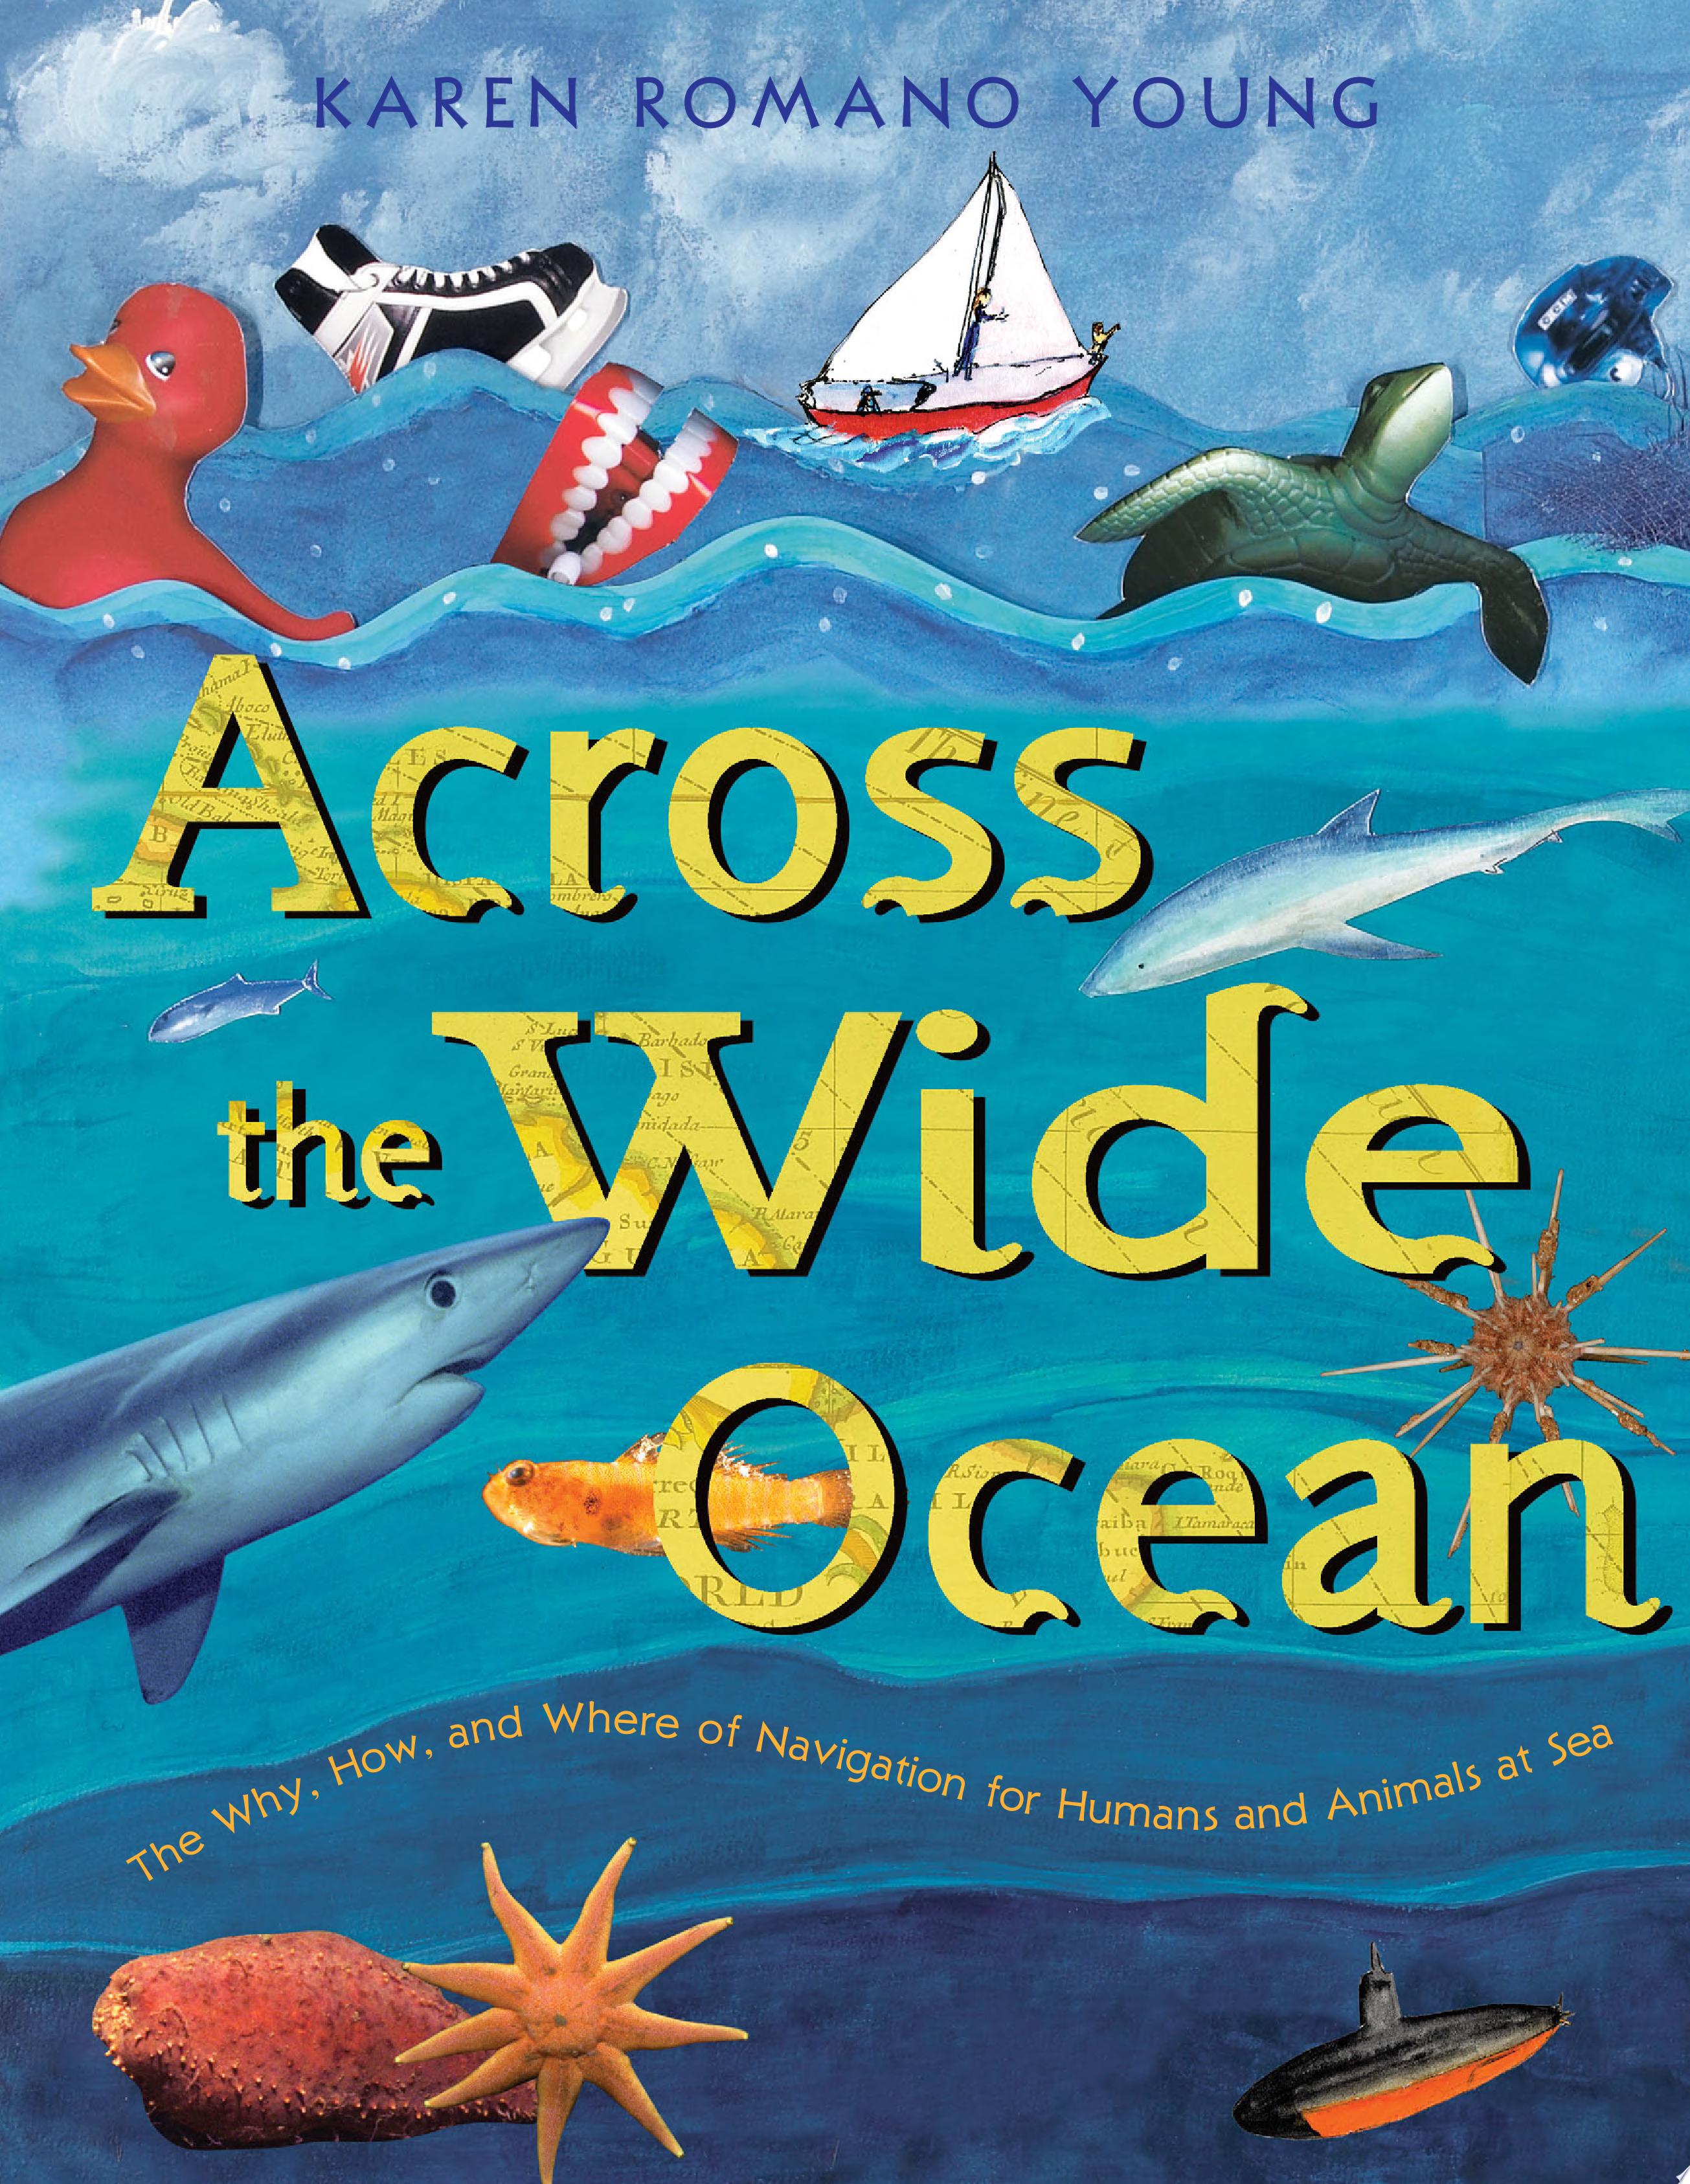 Image for "Across the Wide Ocean"